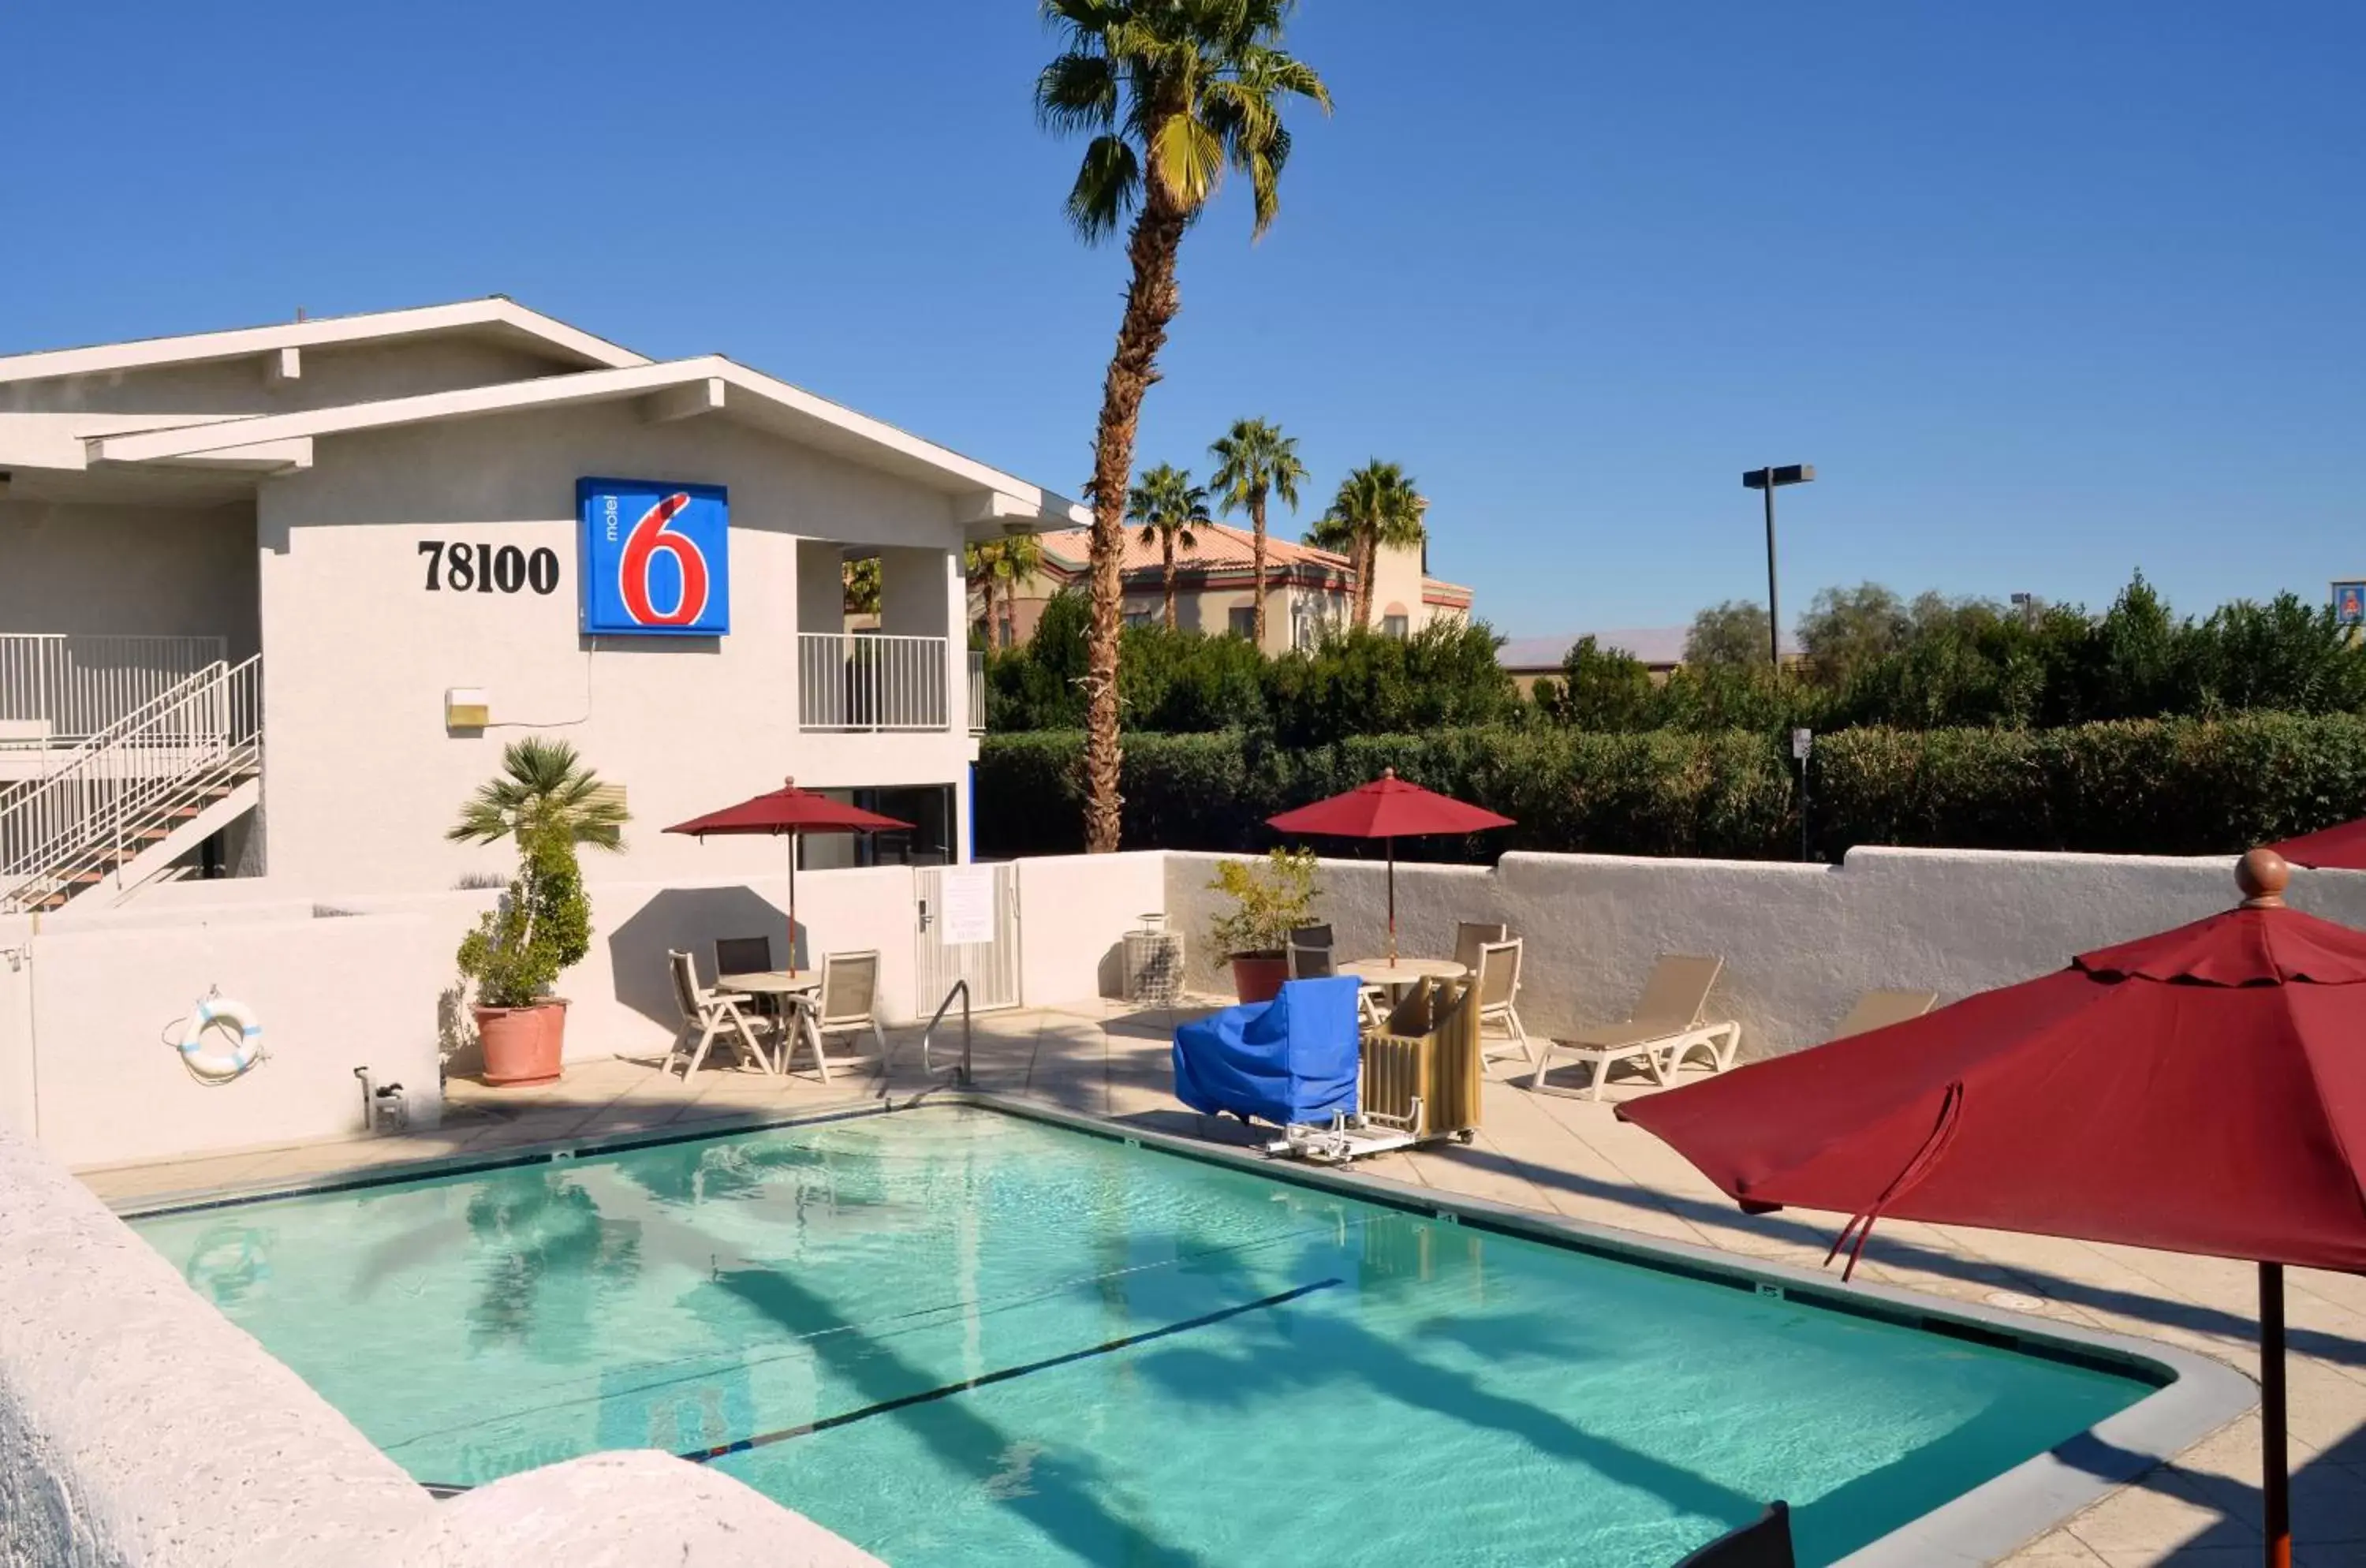 Property building, Swimming Pool in Motel 6-Palm Desert, CA - Palm Springs Area